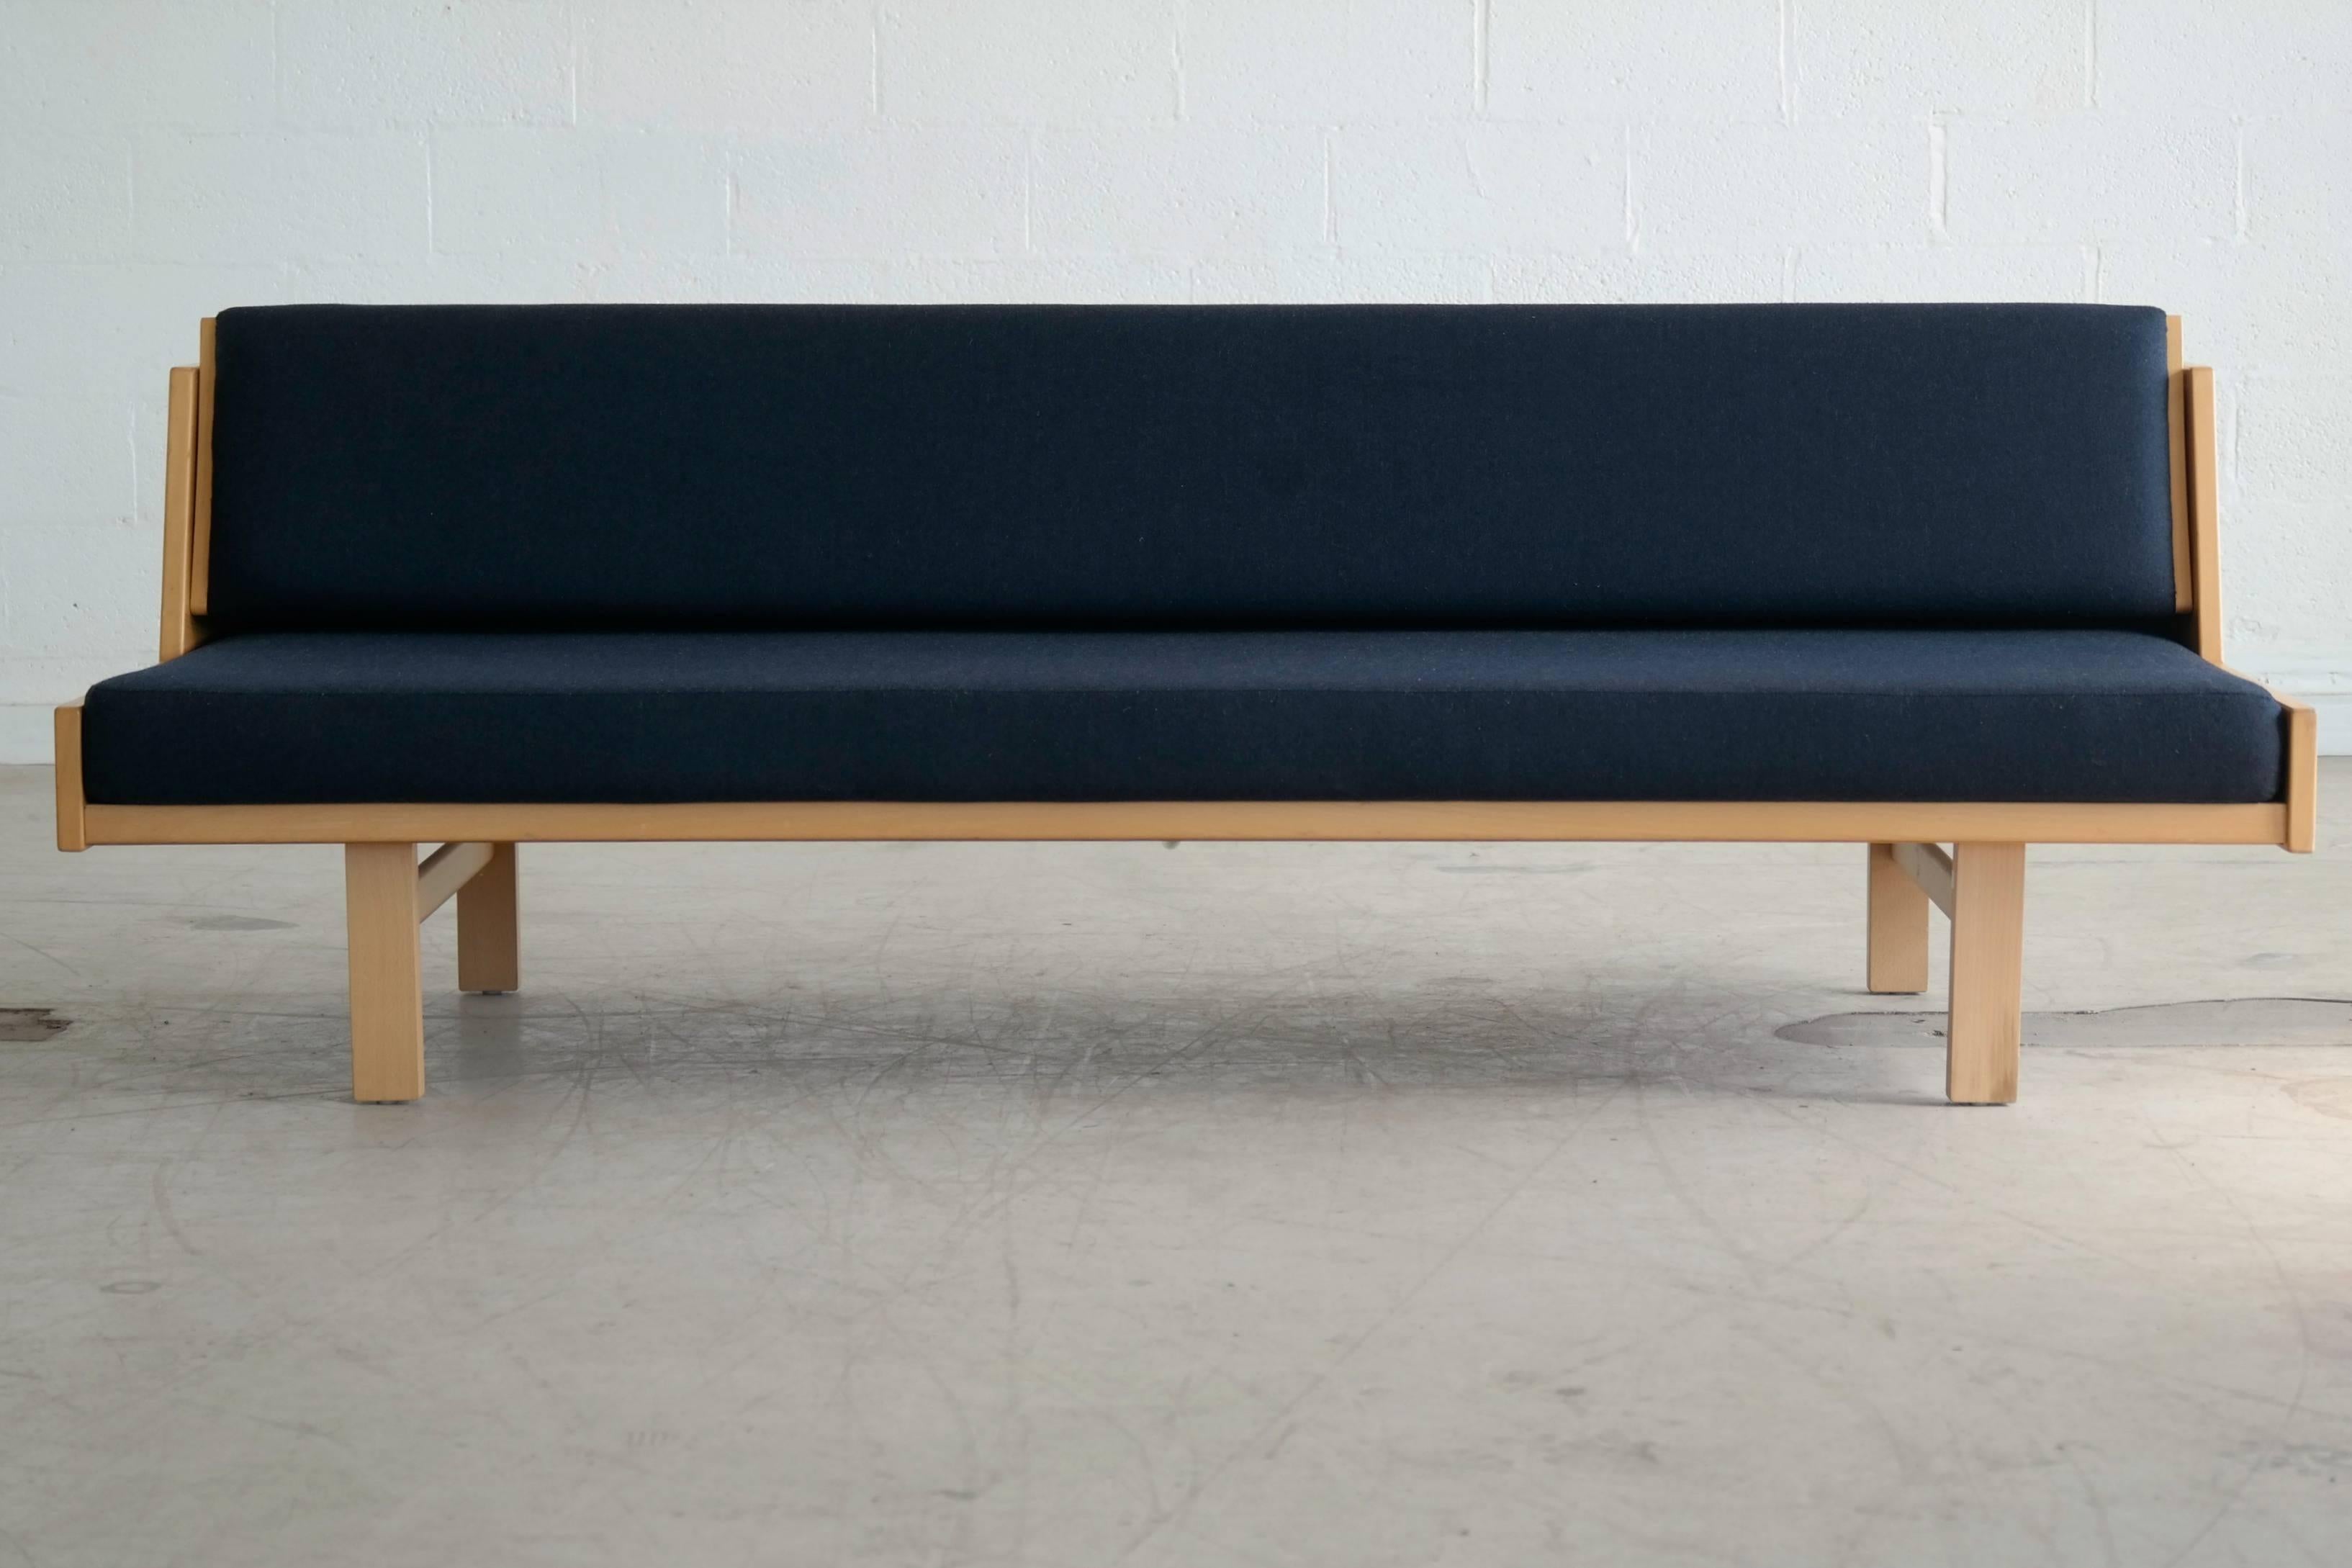 Classic iconic daybed designed by Hans Wegner and manufactured by GETAMA .The frame is made from beech and is upholstered in blue wool fabric. The backrest of the sofa can be raised, giving you added storage space for pillows and blankets. Designed